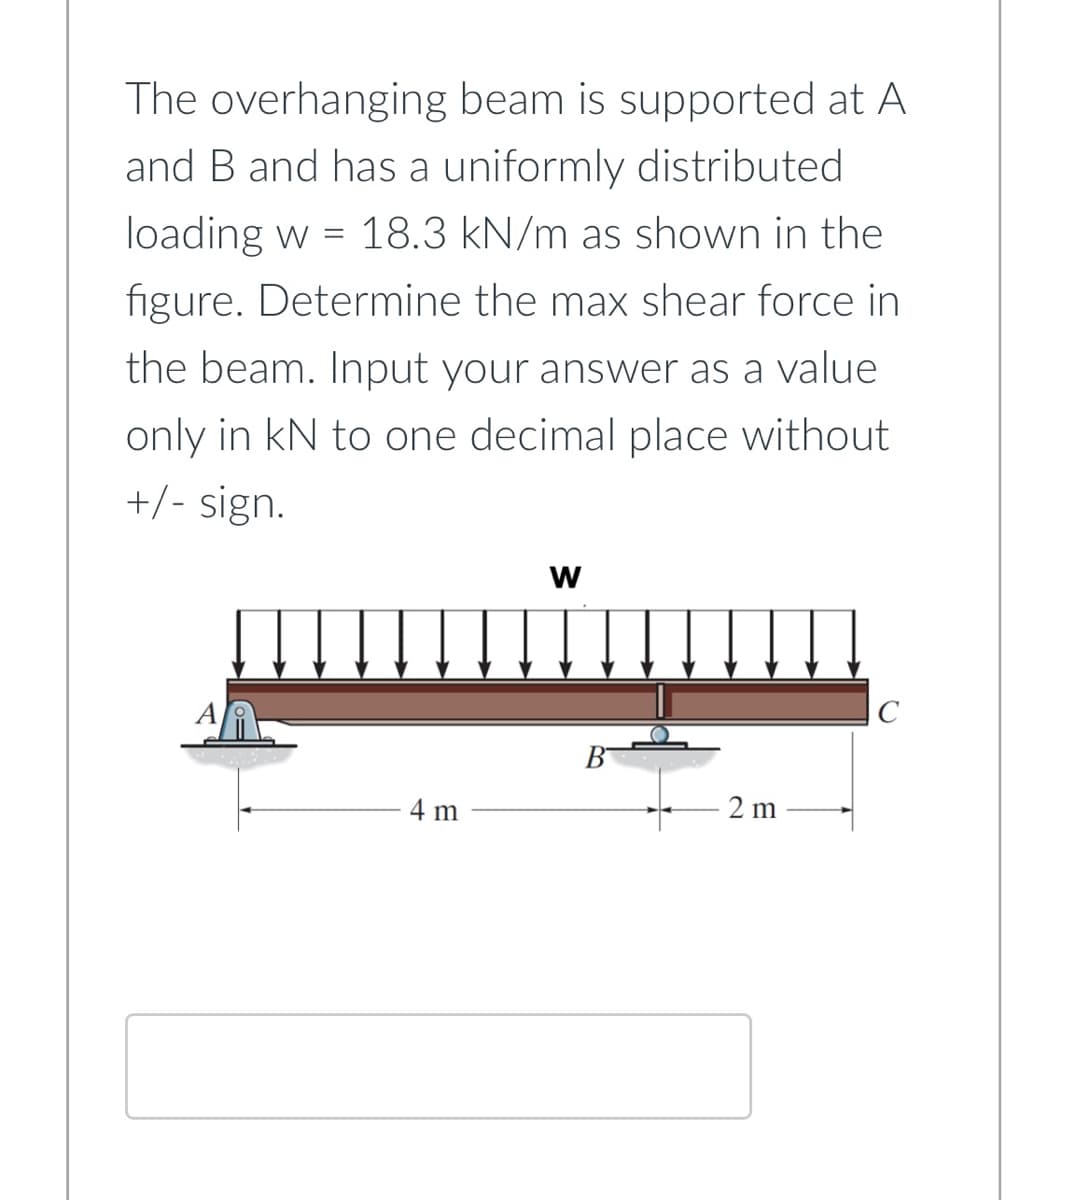 The overhanging beam is supported at A
and B and has a uniformly distributed
loading w = 18.3 kN/m as shown in the
figure. Determine the max shear force in
the beam. Input your answer as a value
only in kN to one decimal place without
+/- sign.
W
C
4 m
2m